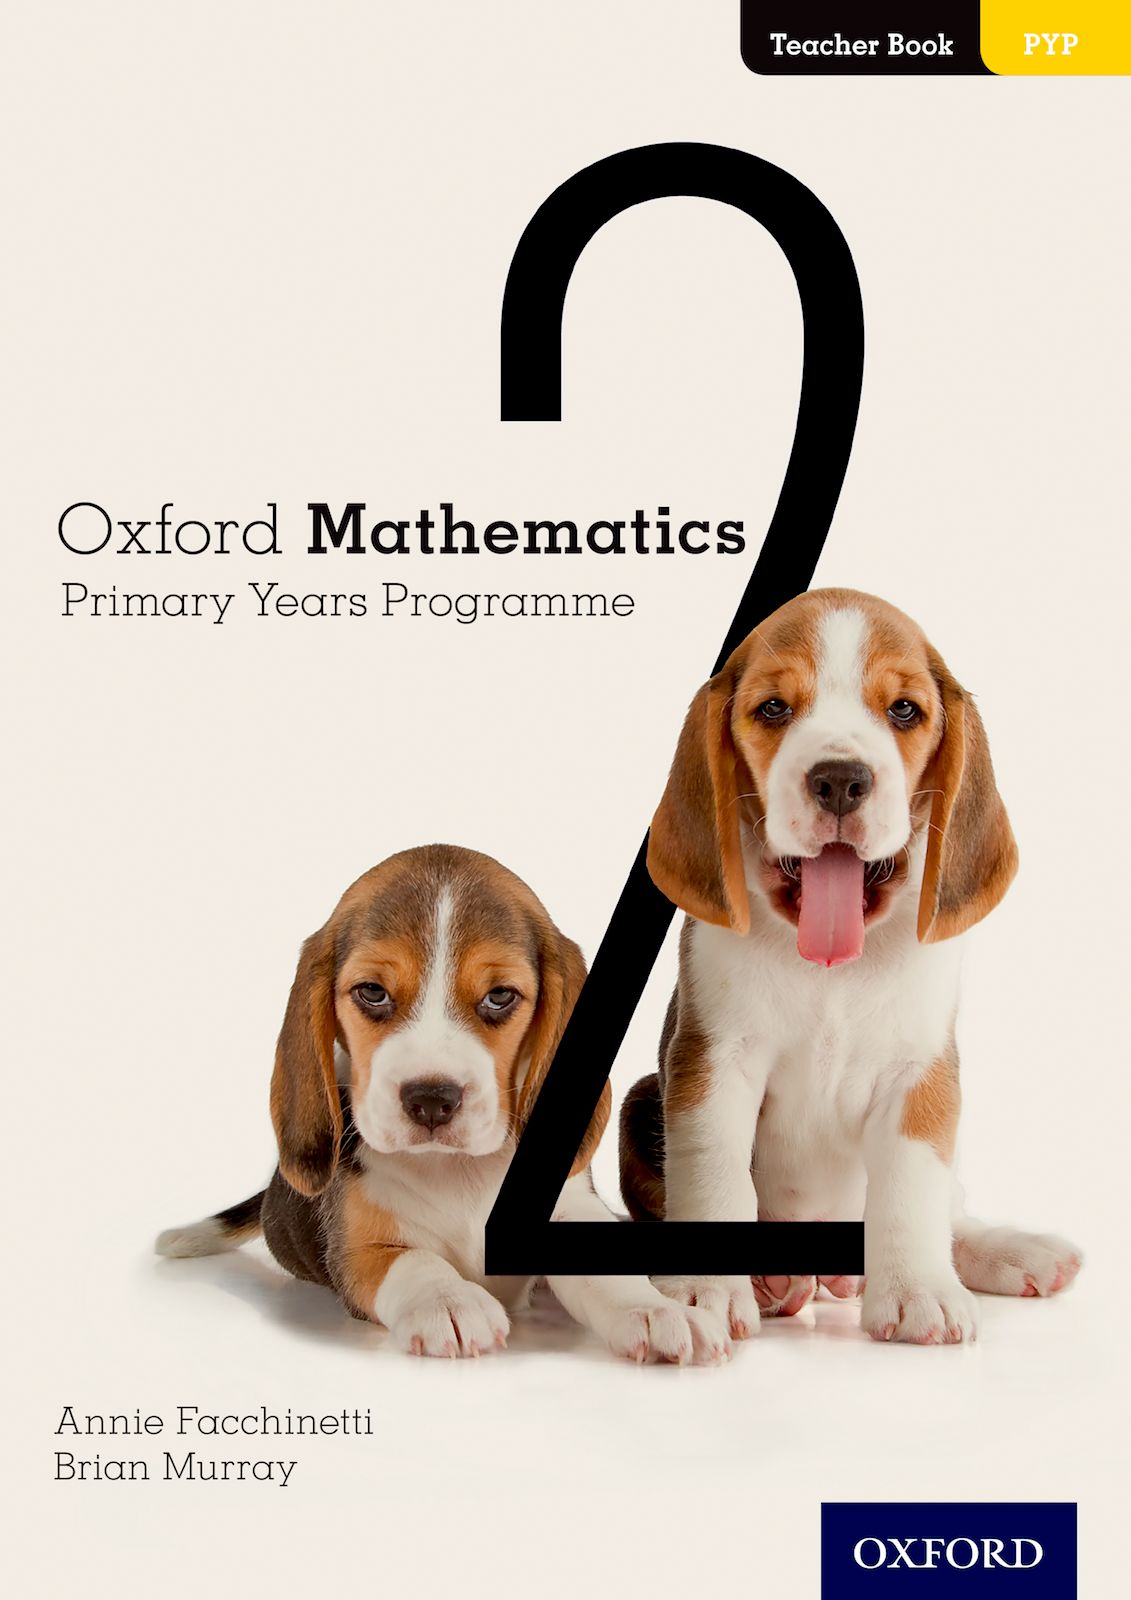 Featured image for “Oxford Mathematics Primary Years Programme Teacher Book 2”